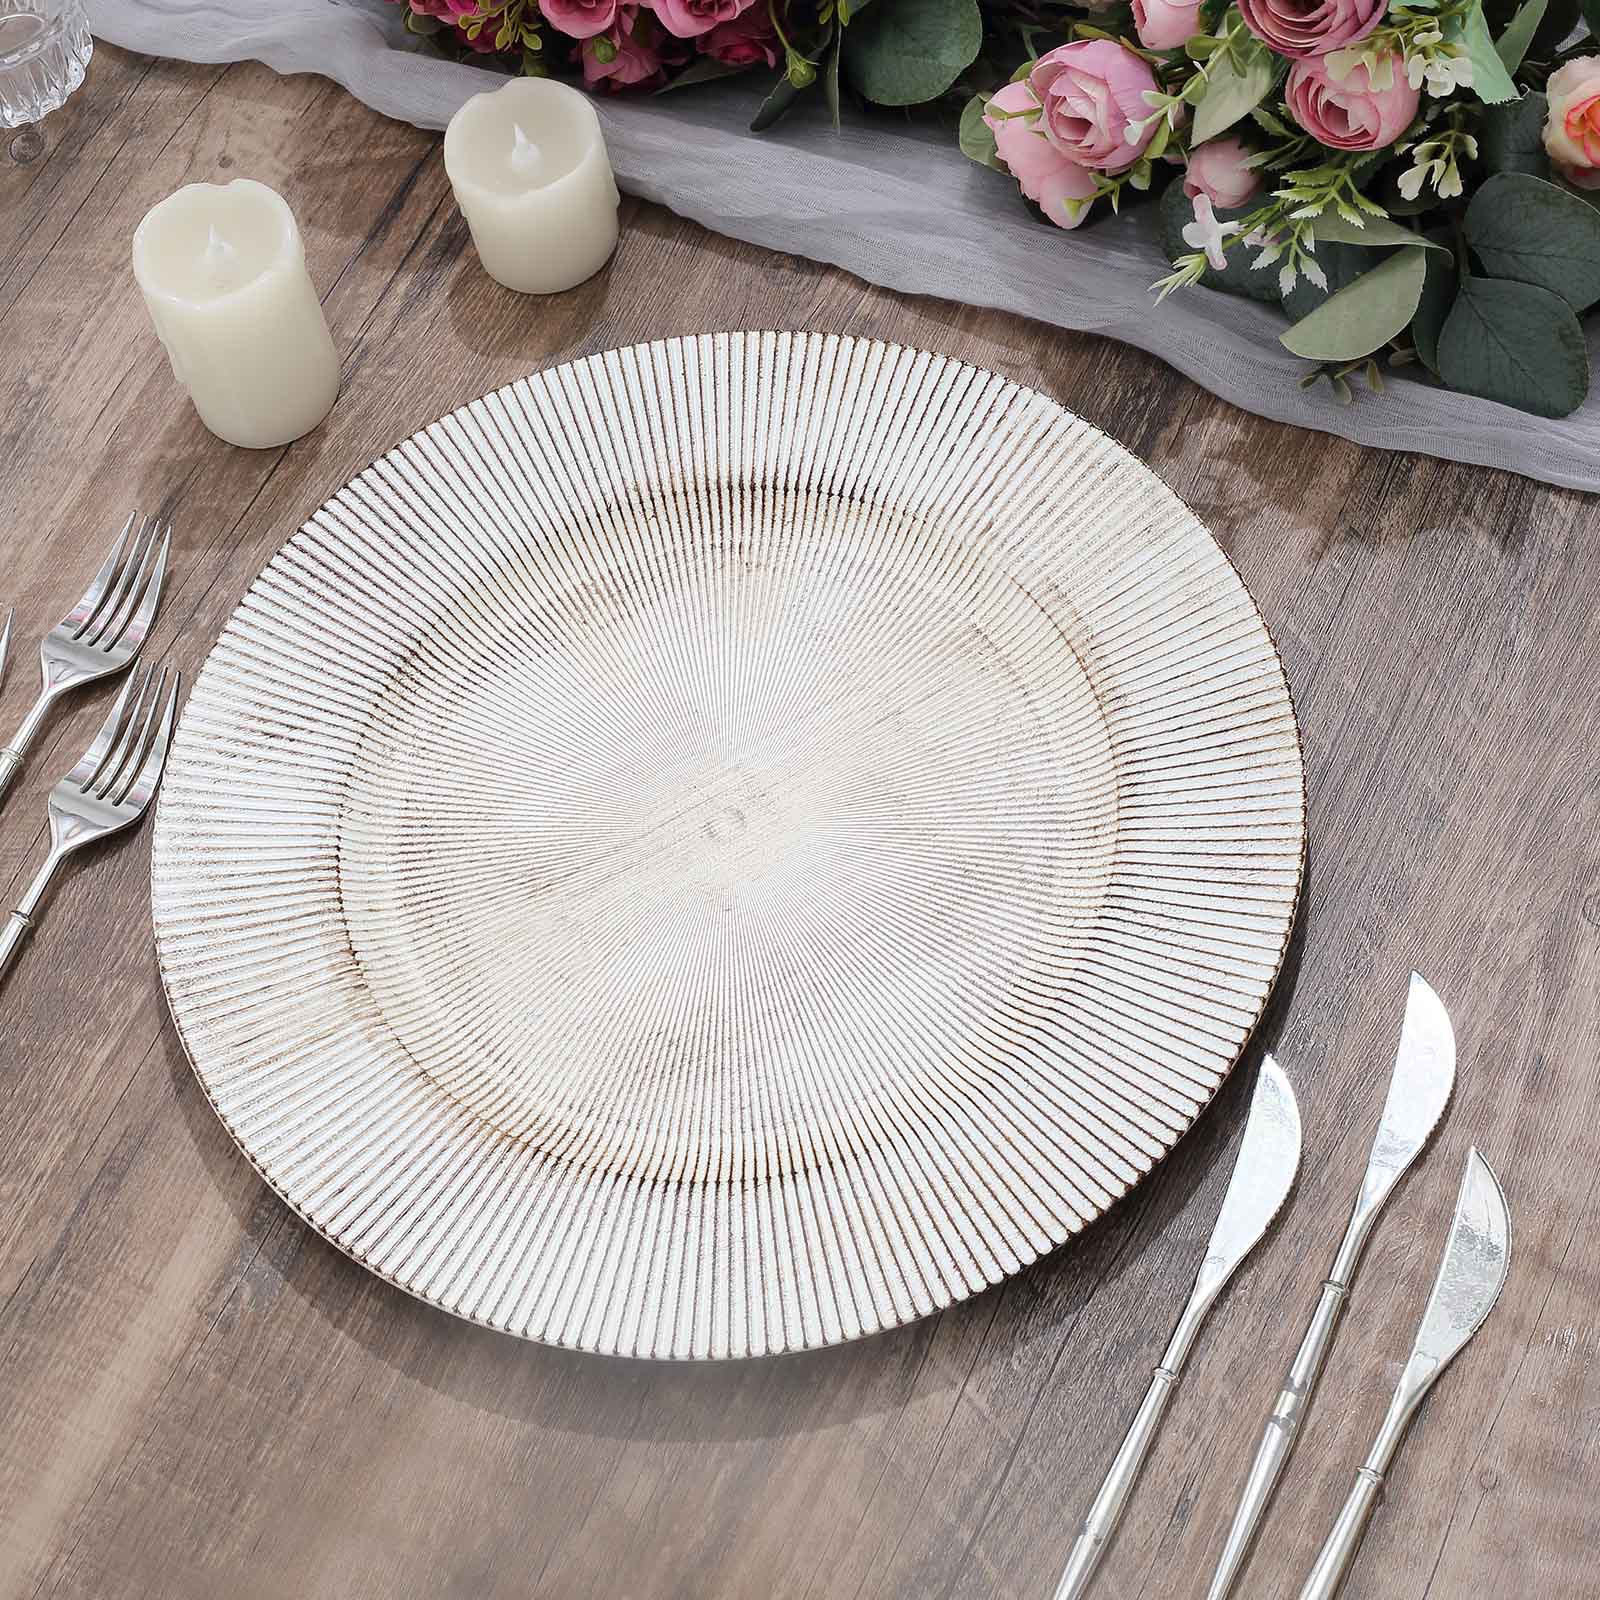 6 White Washed 13 in Rustic Wooden Round Plastic Charger Plates with Sunray Trim